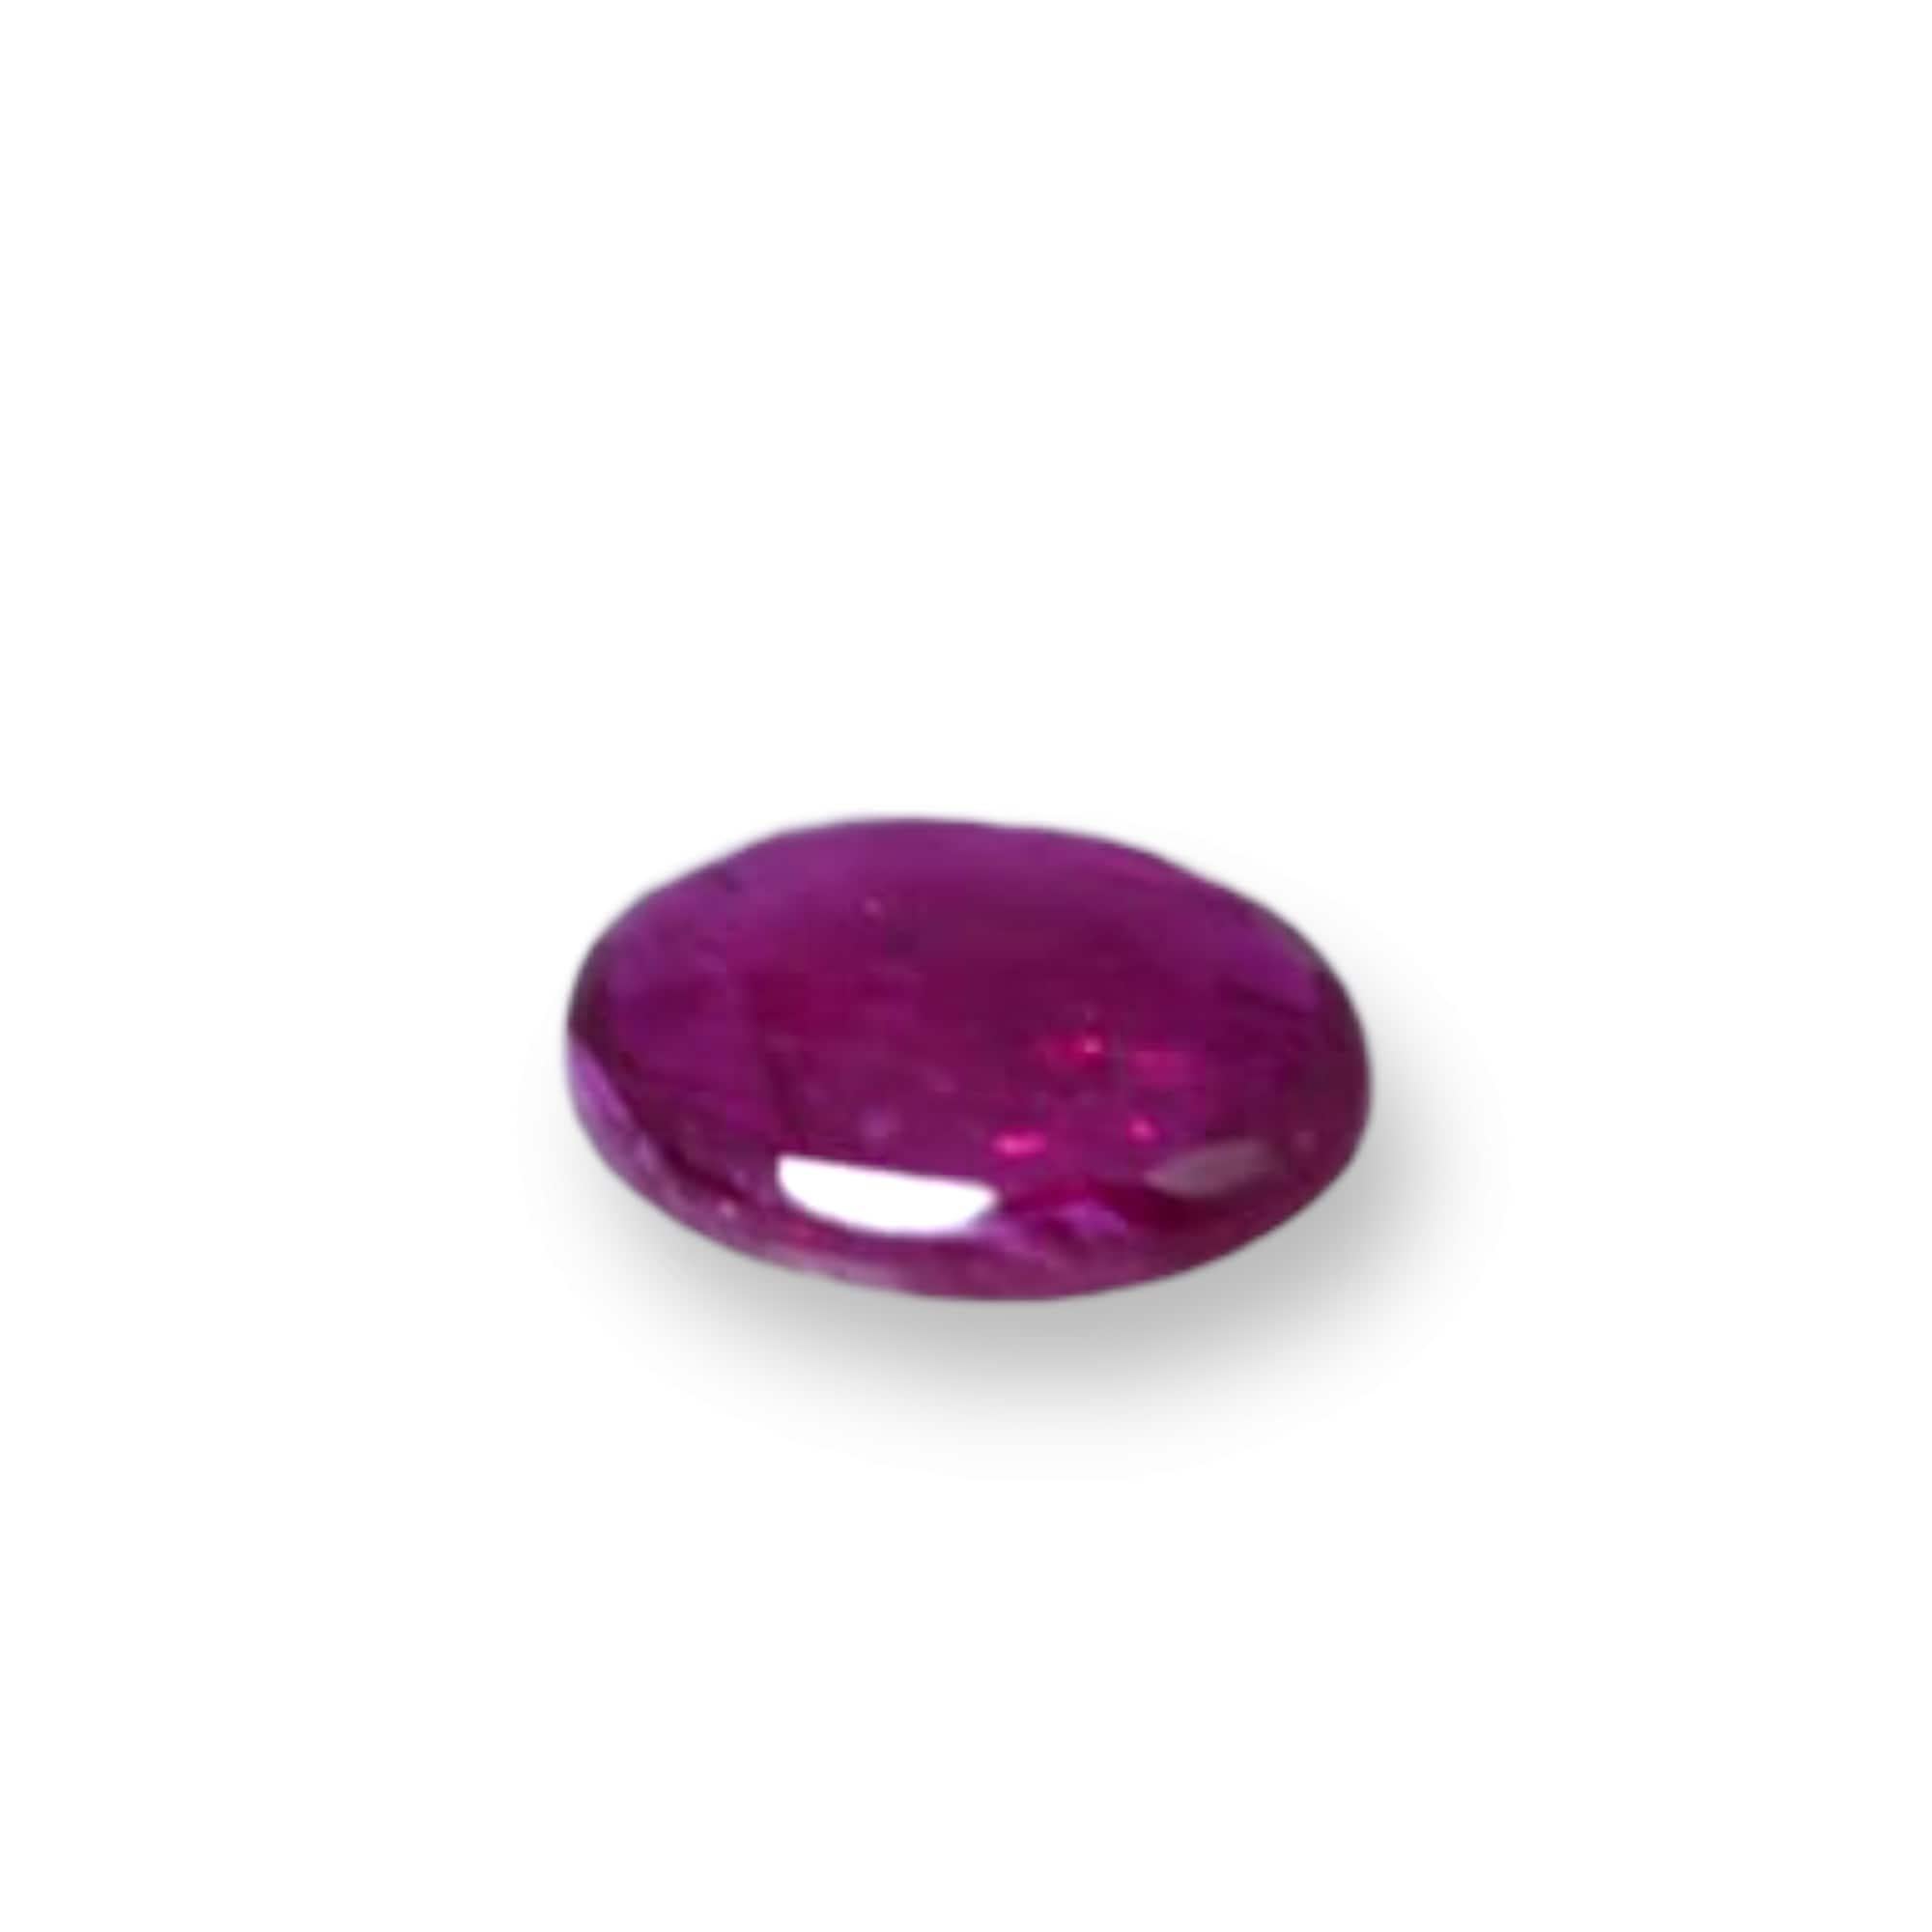 Species : Natural Corundum
Variety : Natural Ruby
Shape and Cut : Oval Mixed Cut
Weight : 0.57 Carat
Measurements : 6.38 x 4.54 x 1.92 mm
Color : Pinkish Red
Transparency : Semi-Transparent
Certificate number : 310834296
This gemstone is certified